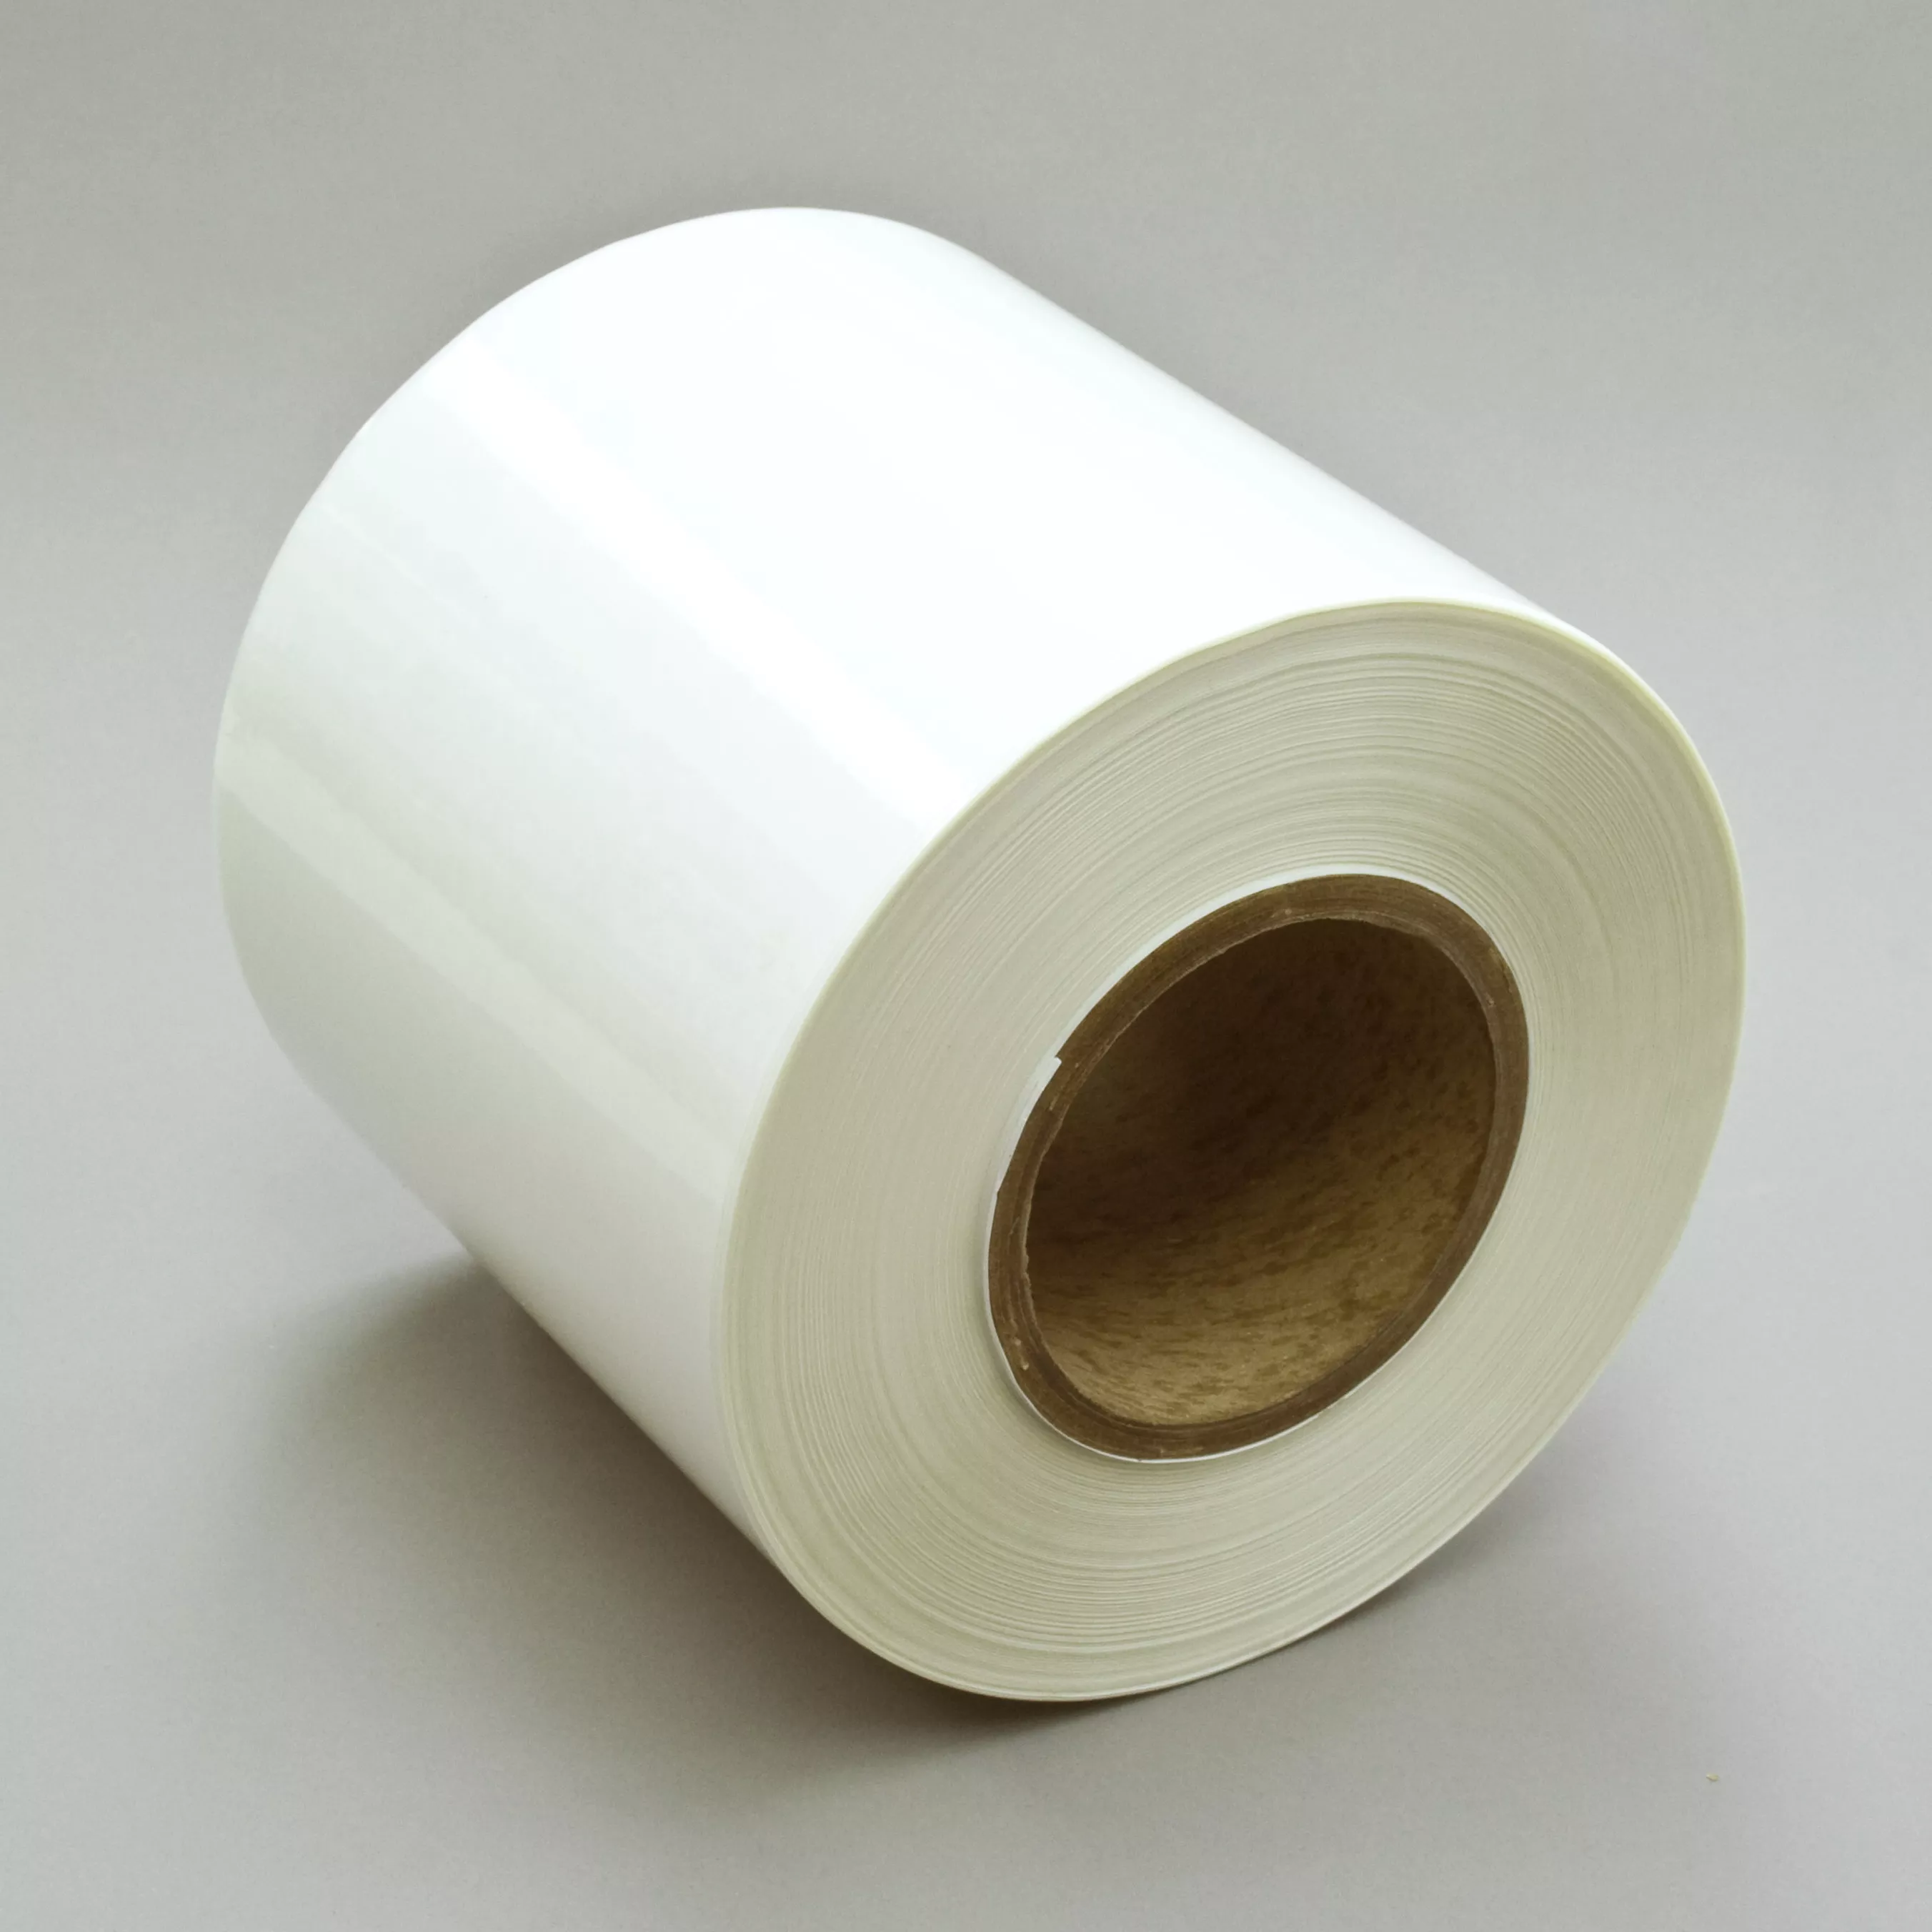 3M™ Thermal Transfer Label Material 7876, Clear Polyester Gloss, 6 in x
1668 ft, 1 Roll/Case